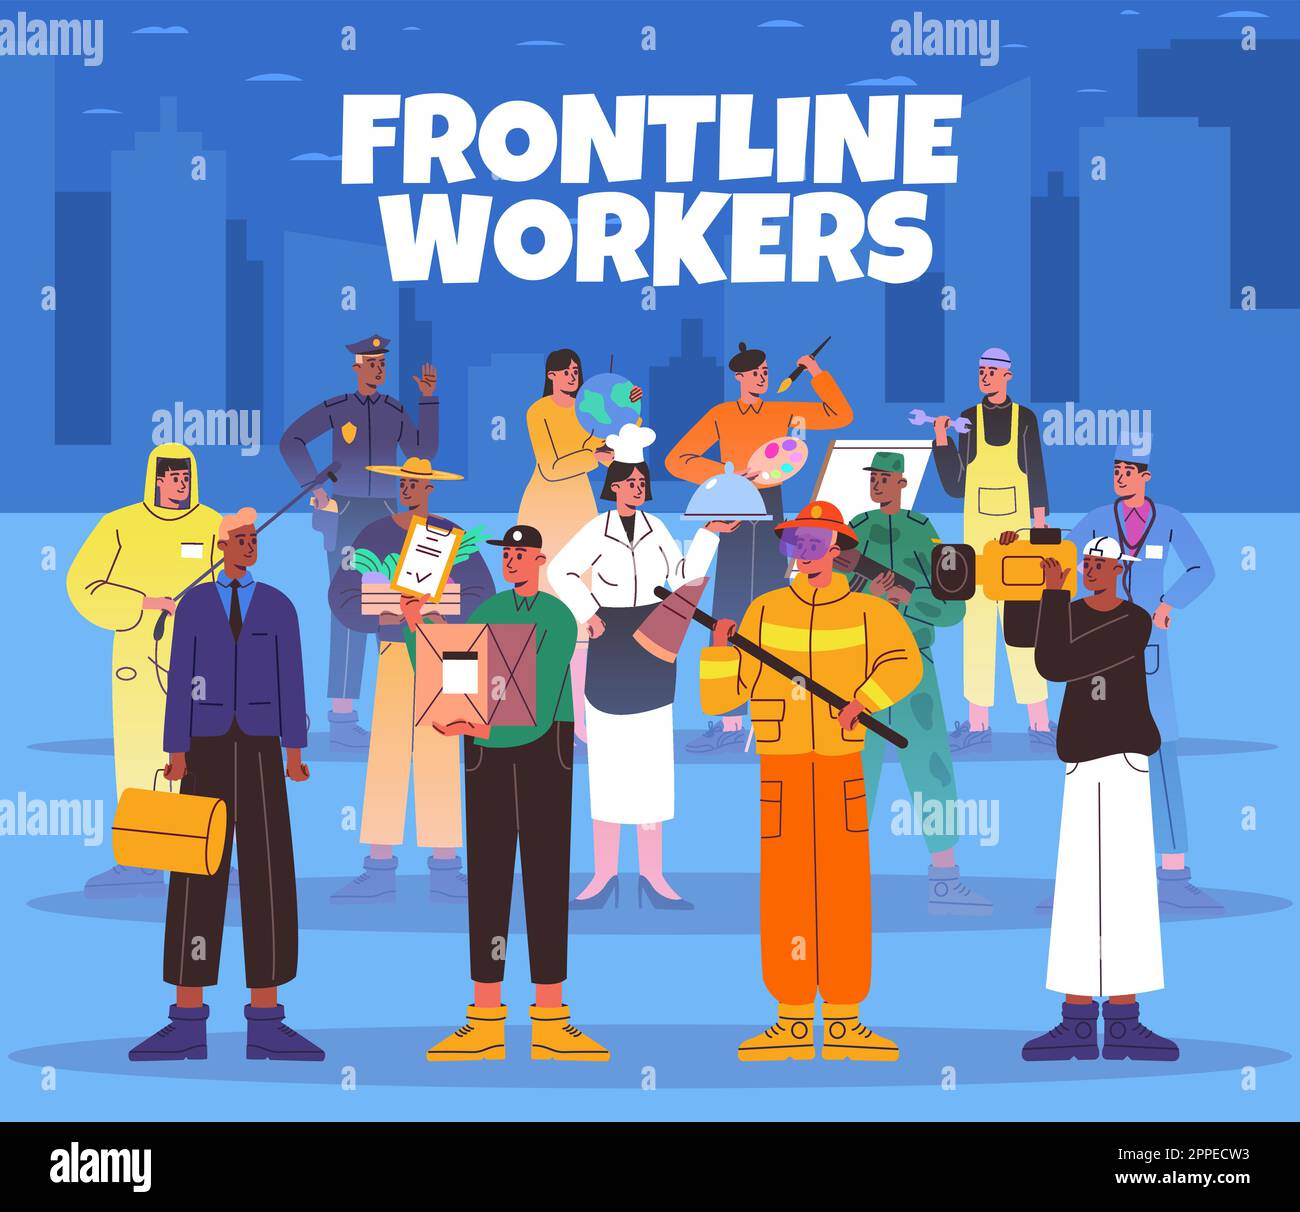 Frontline workers poster. Labor Day inspirational card. Representatives of different professions in uniform. Standing people group. Professional Stock Vector